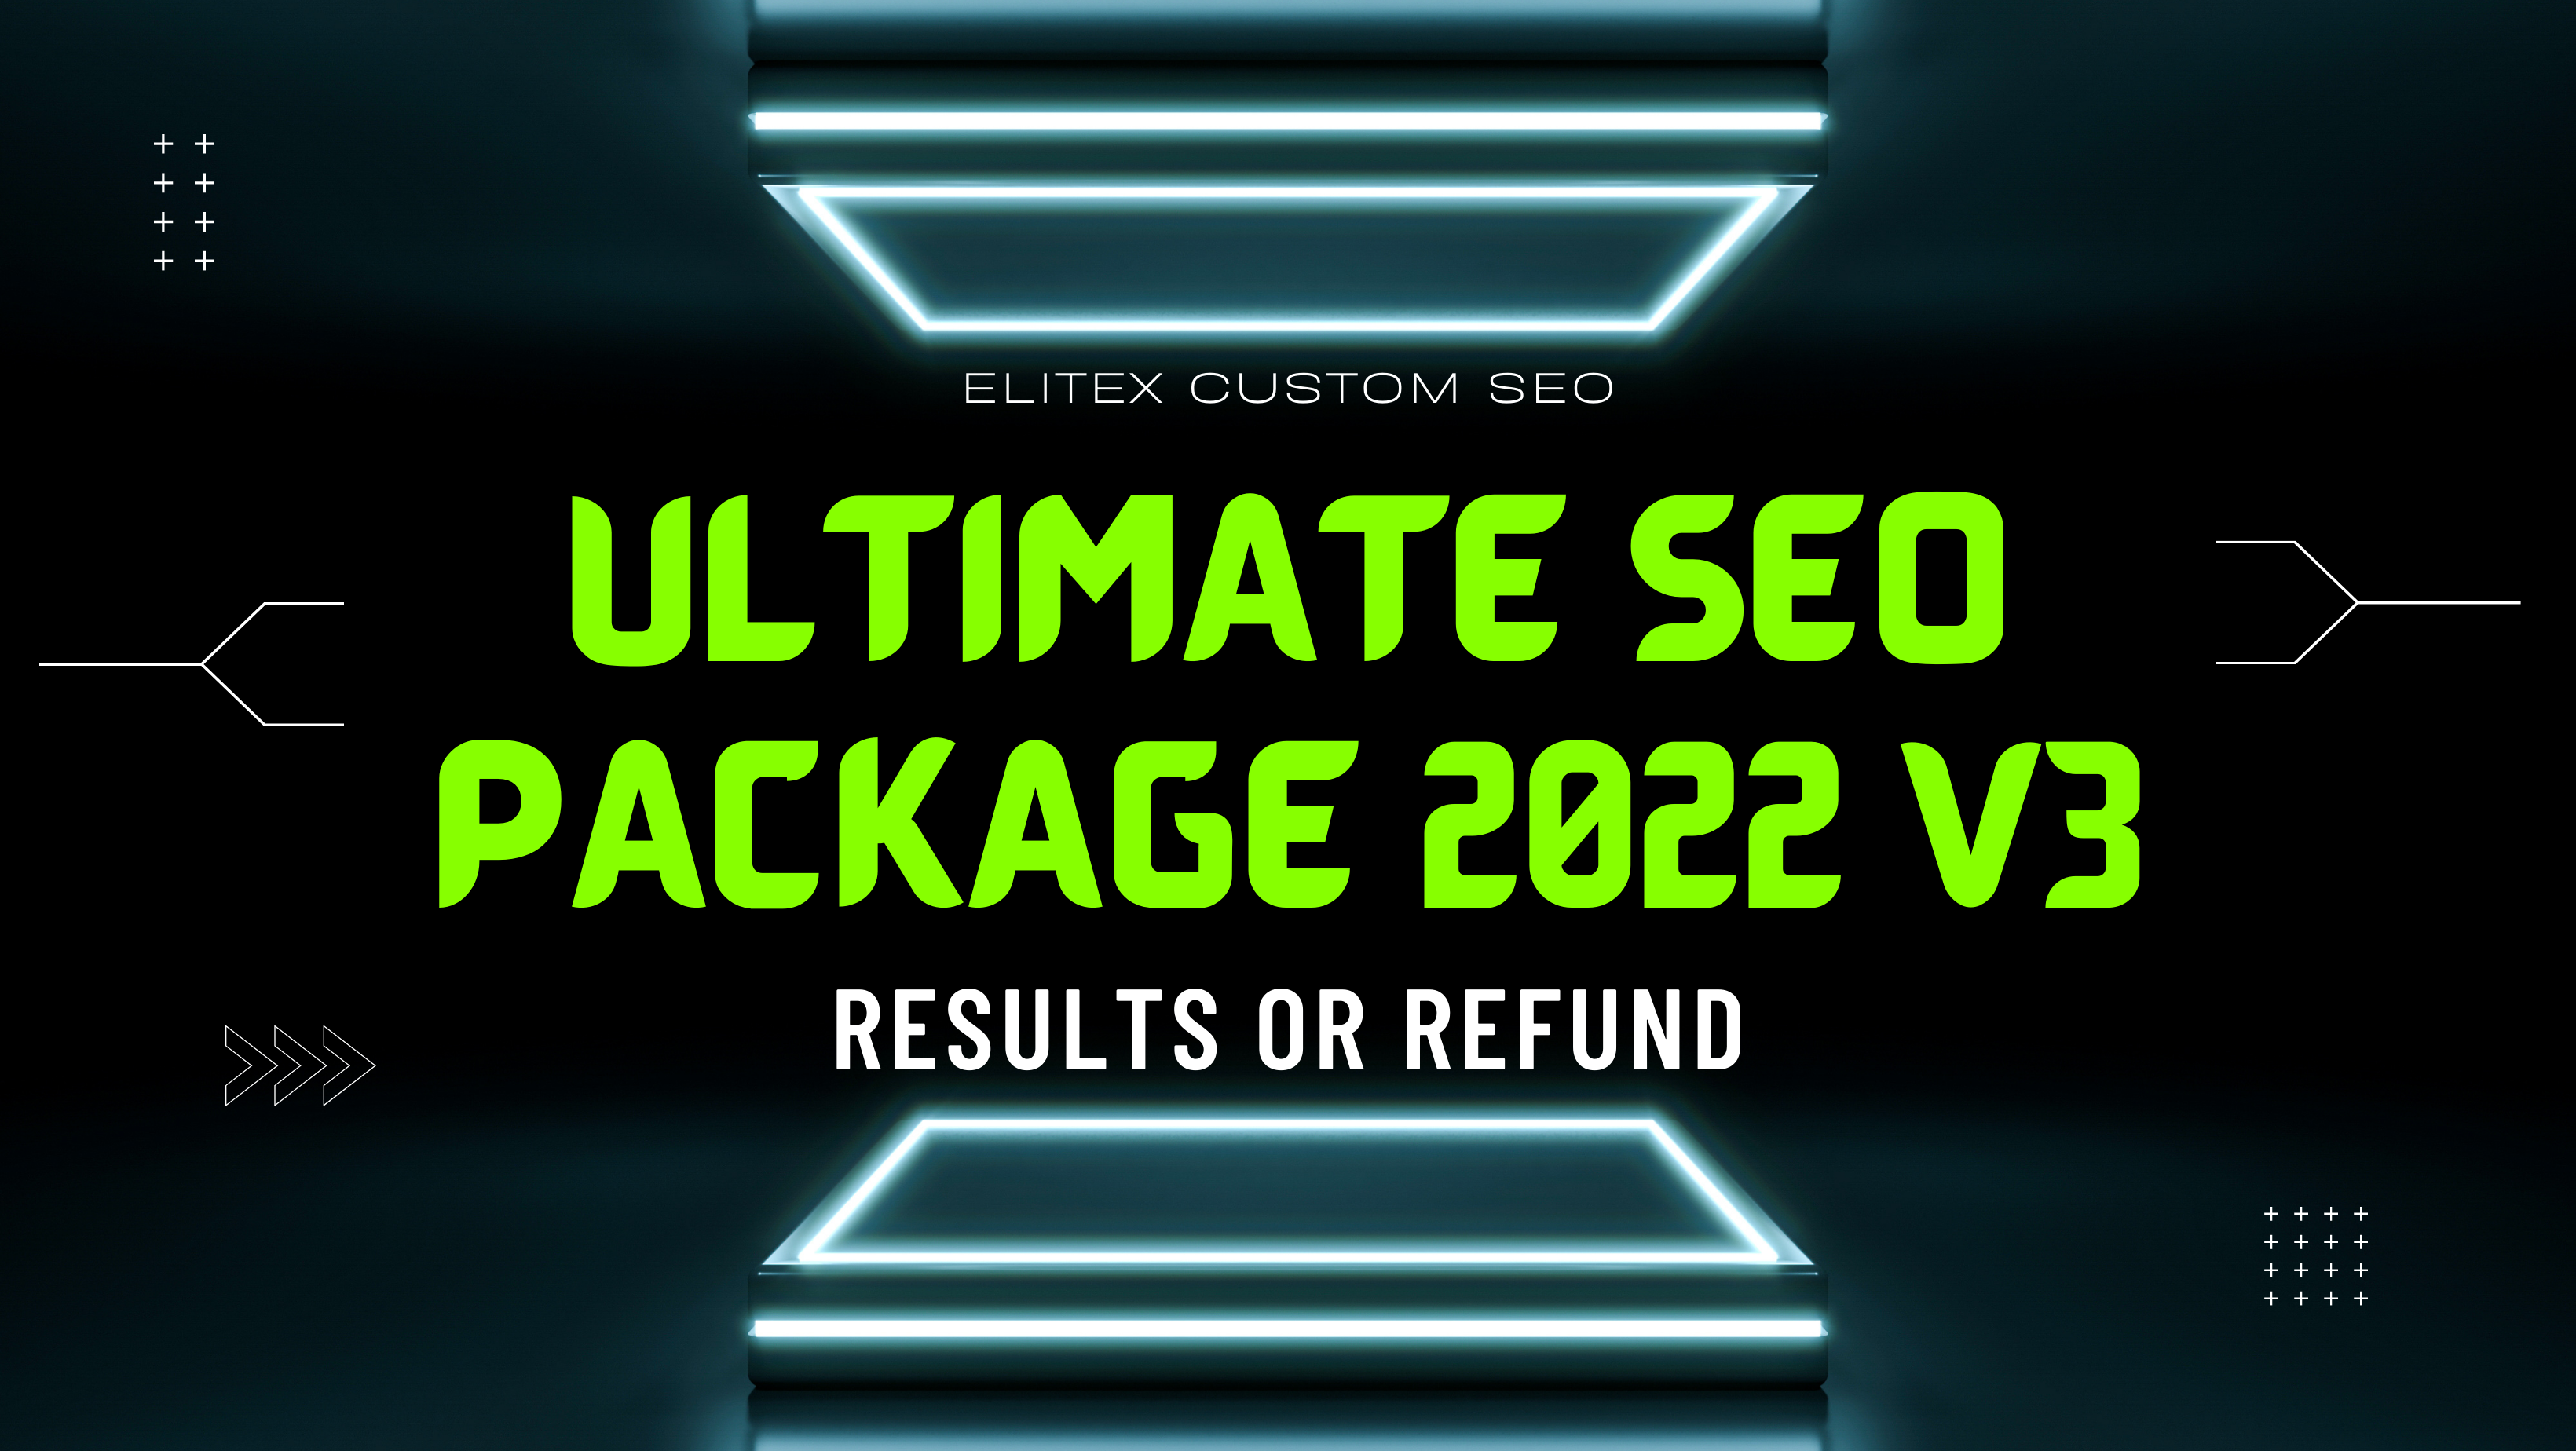 EliteX Ultimate CUSTOM SEO PACKAGE 2022. Ranking Improvements OR Full Refund With Live Rank Tracker